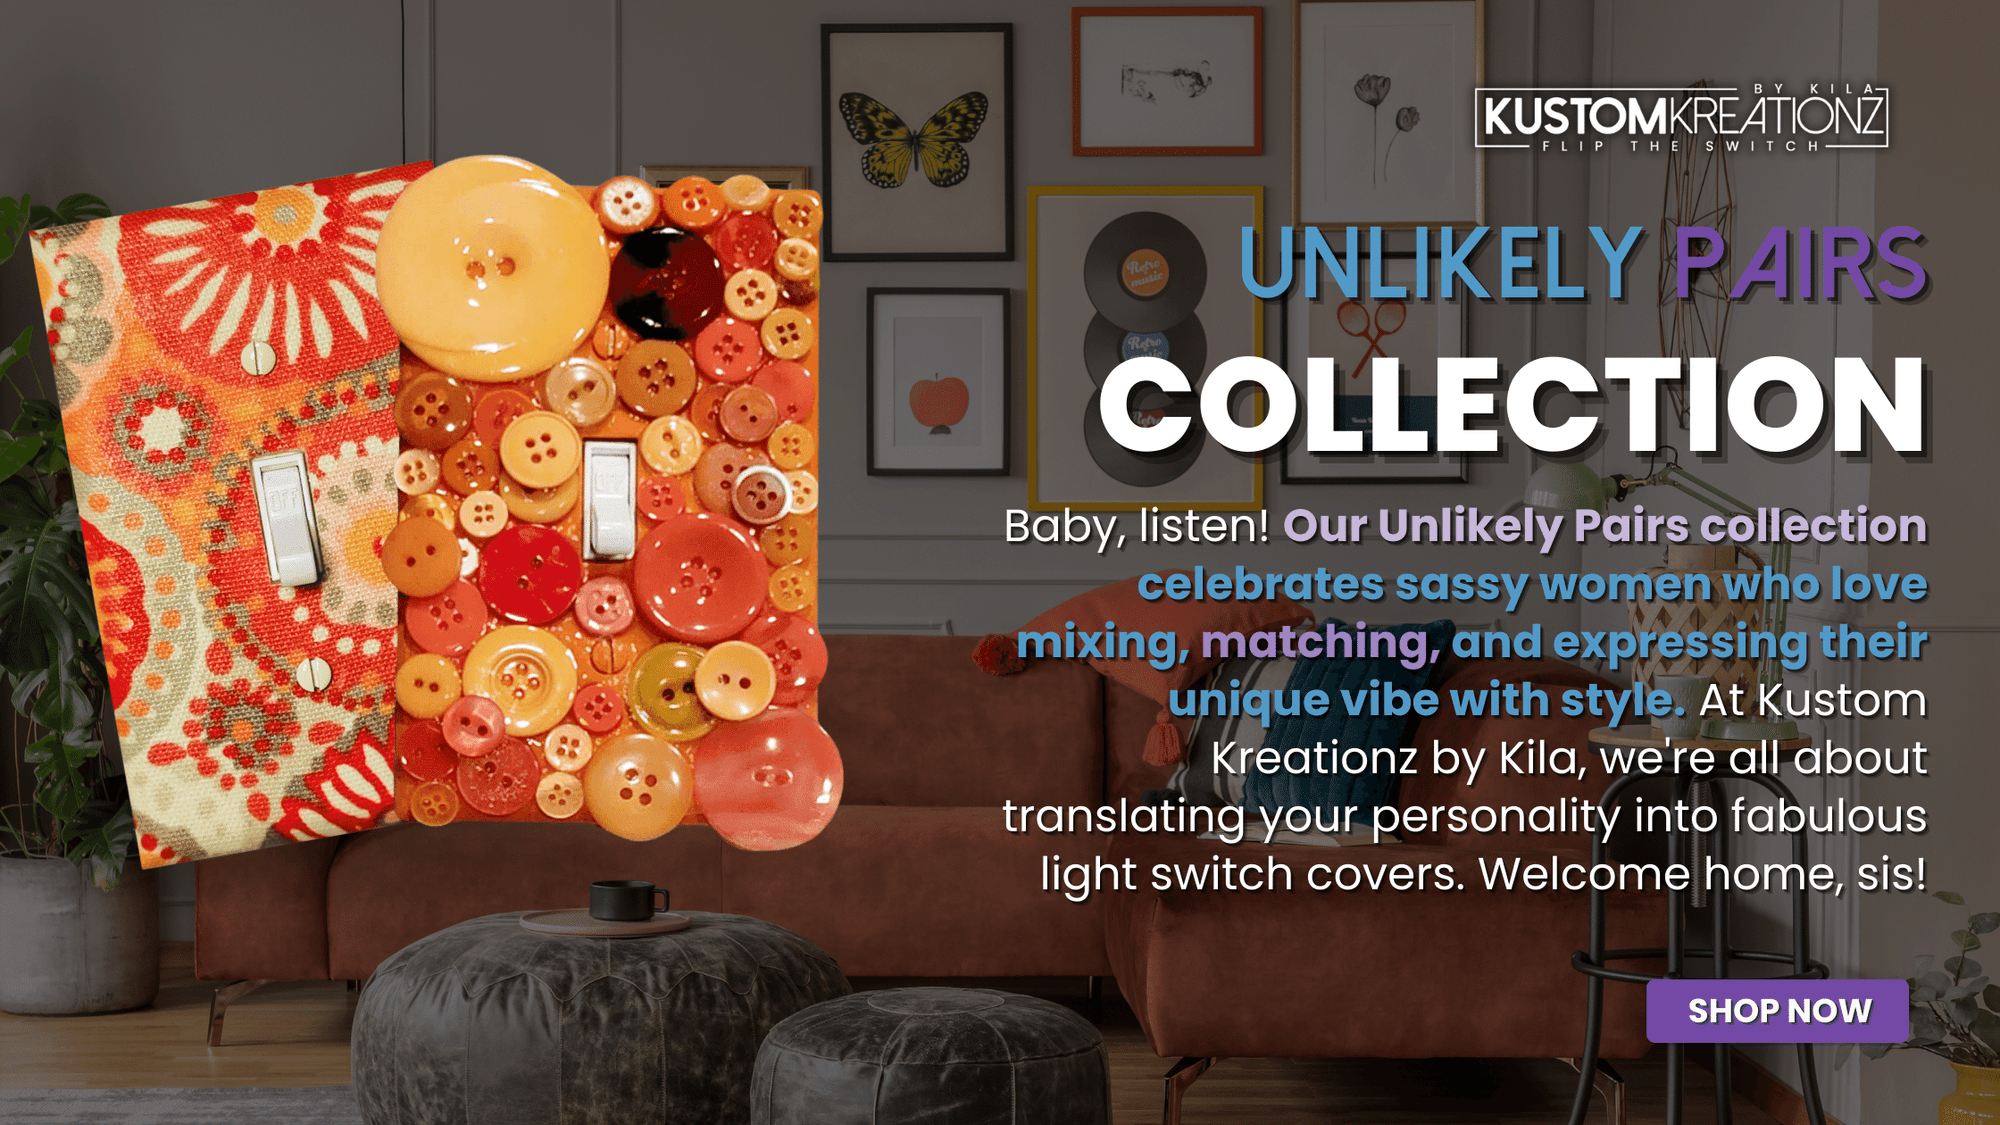 Hey sis, Unlikely Pairs at Kustom Kreationz by Kila is all about flaunting that sass! We empower you to mix, match and show off your unique vibe with style. Because your home should reflect YOU, Queen! 